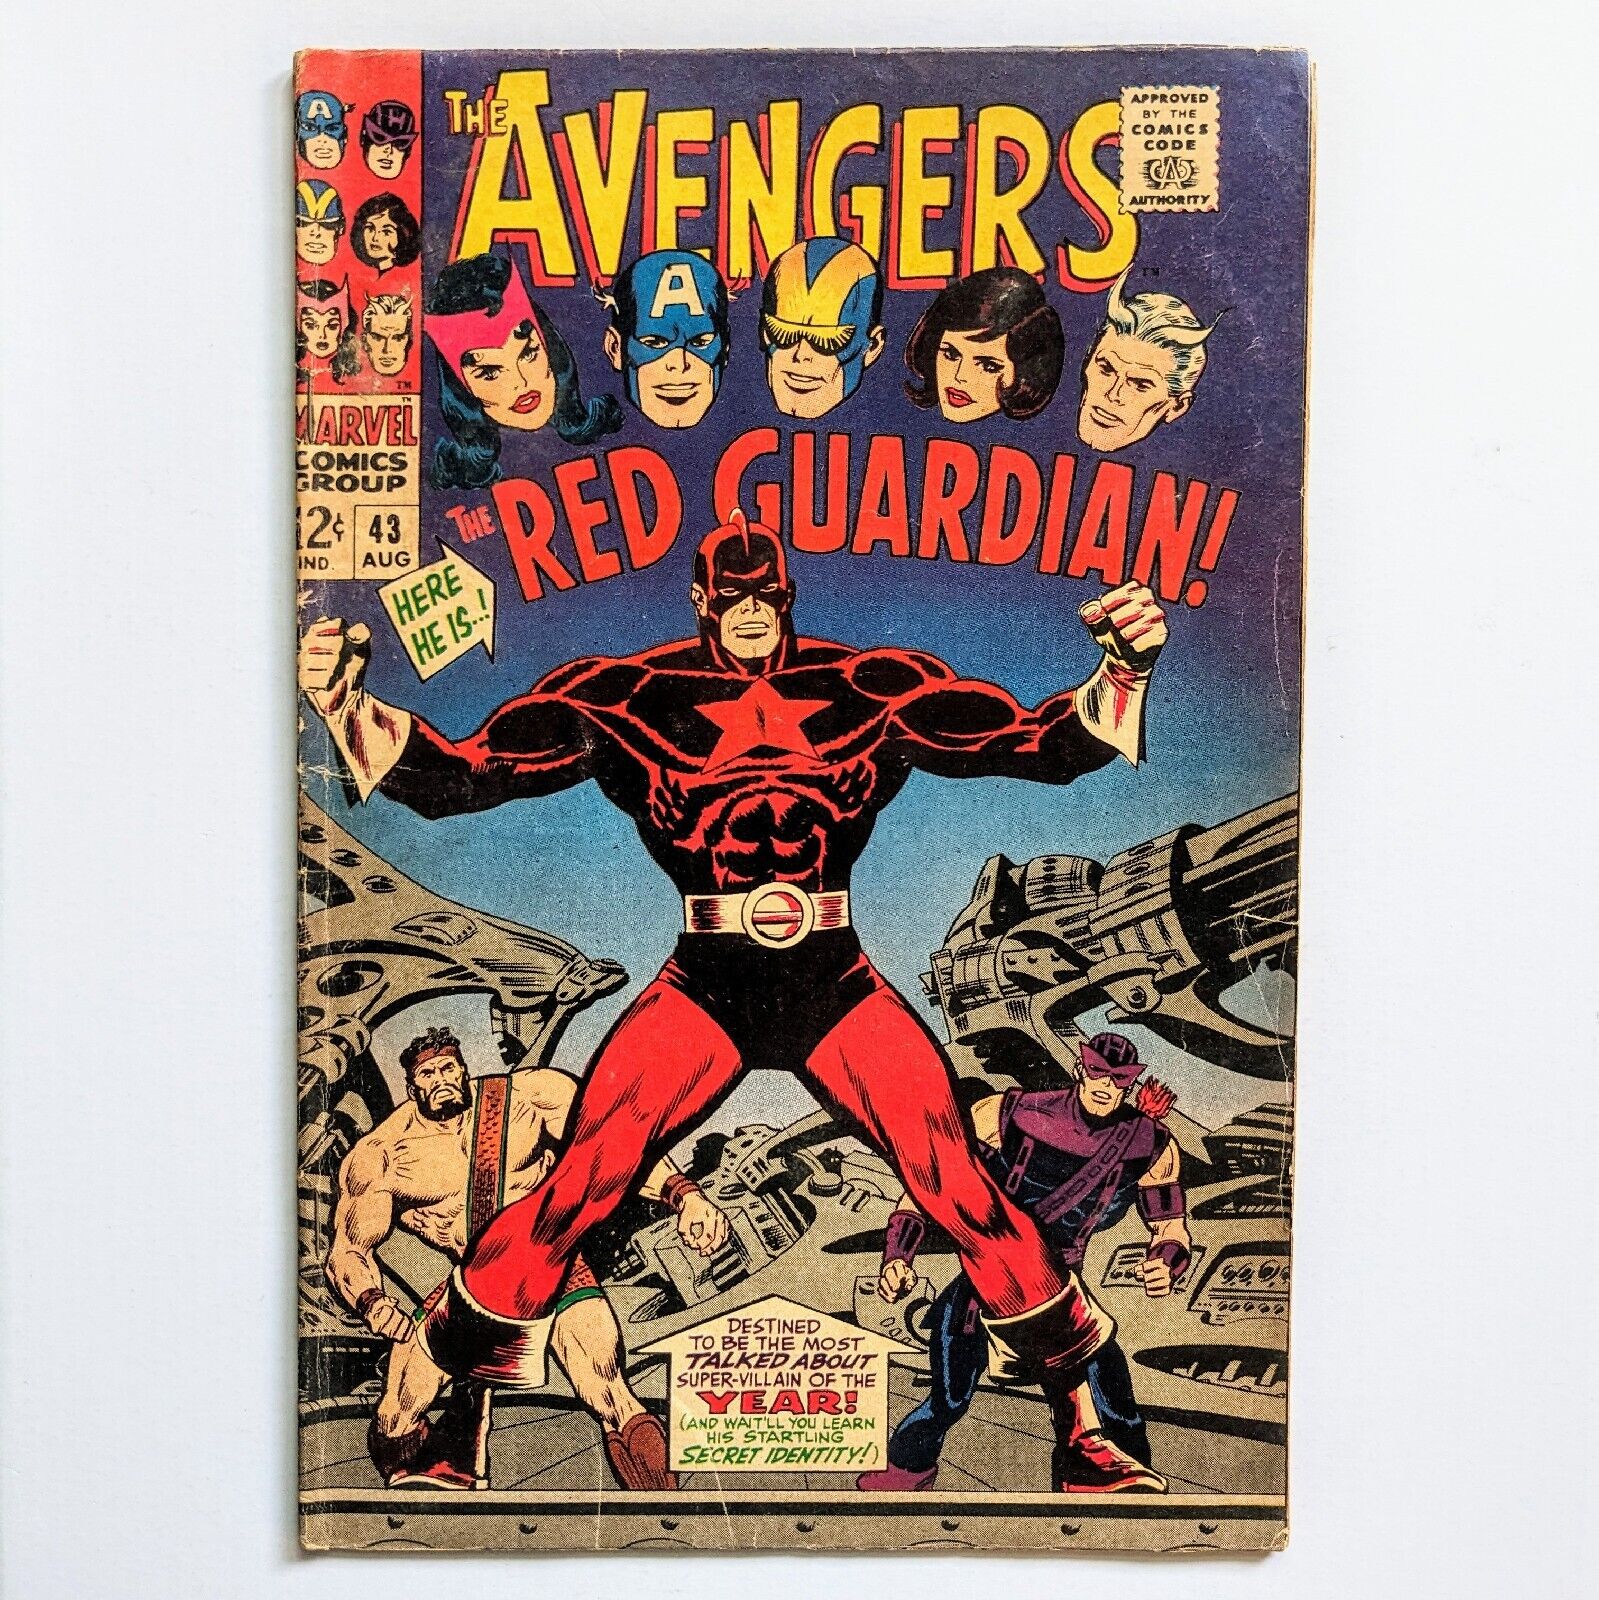 AVENGERS #43 - 1ST RED GUARDIAN / 1967 SILVER AGE / MARVEL COMIC 🔥